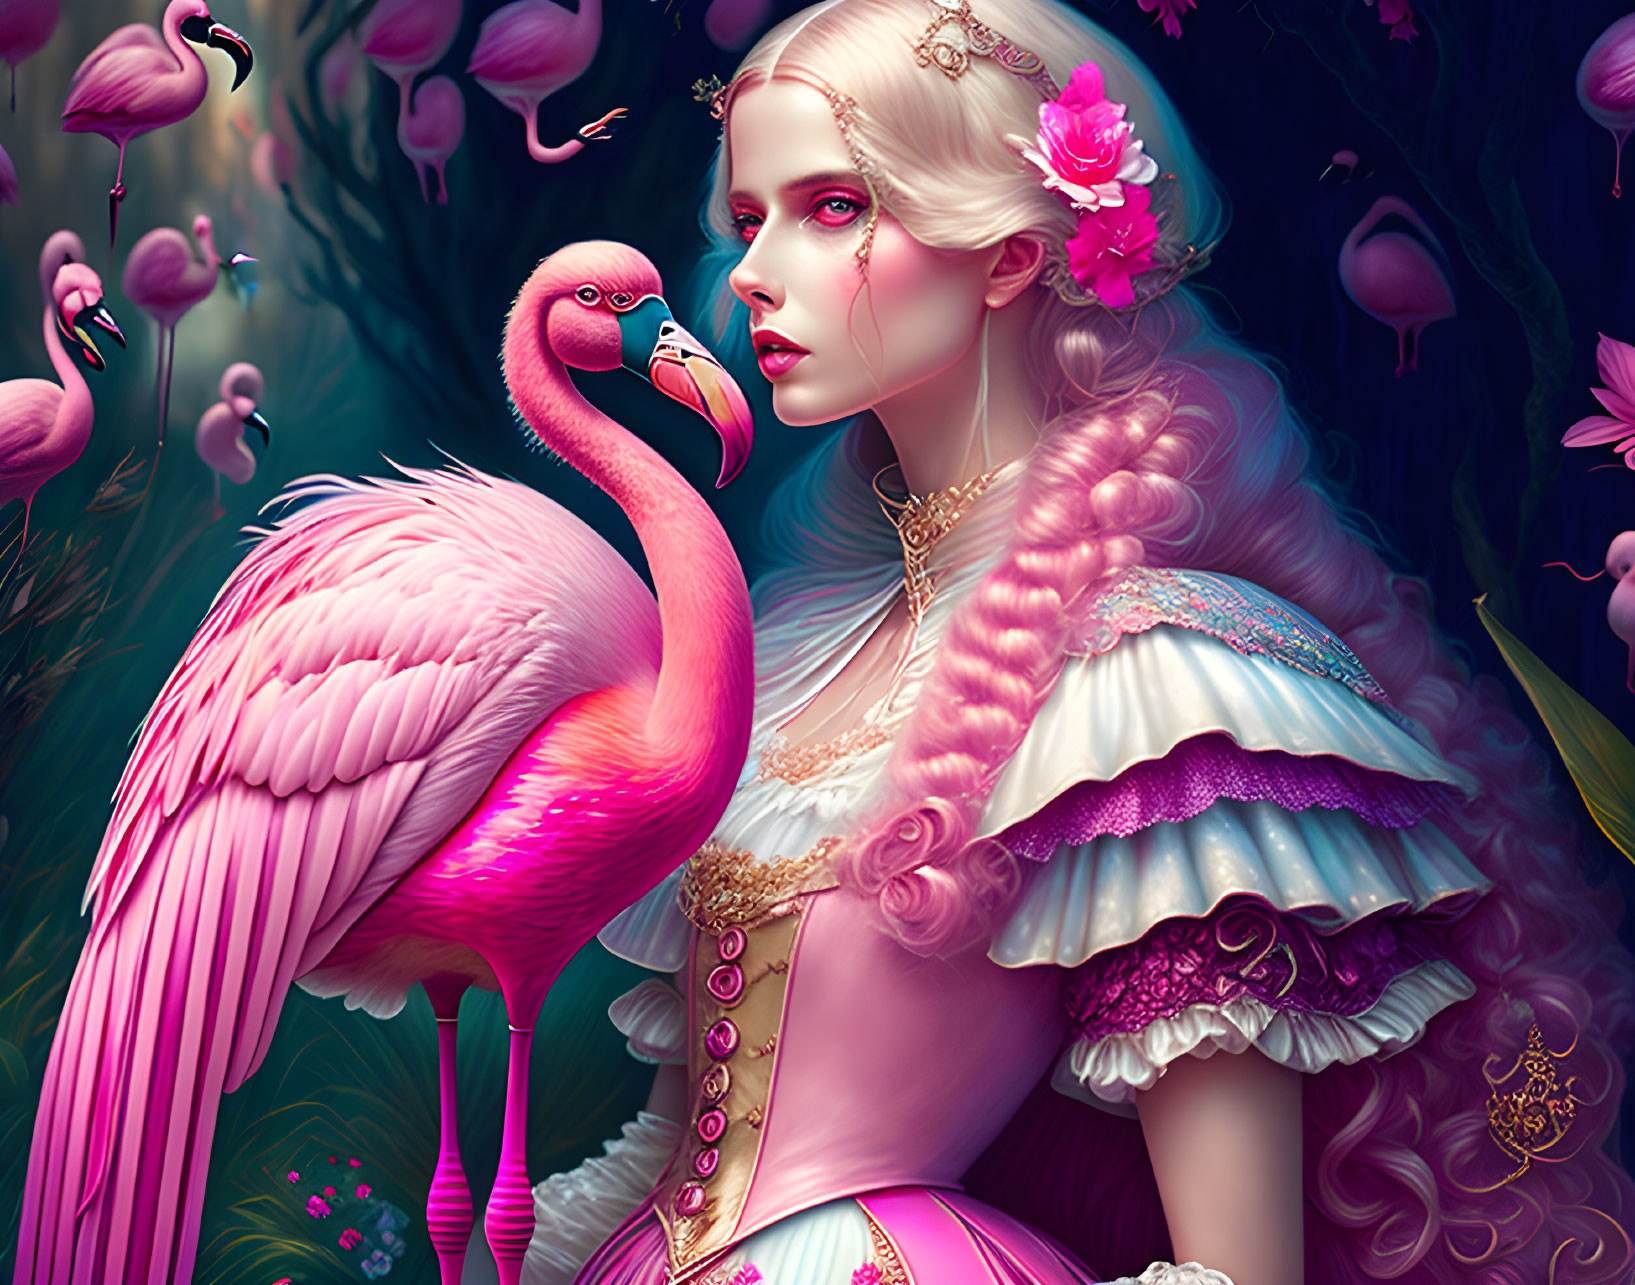 Pale-skinned woman with pink hair and roses next to pink flamingo in vibrant, fantastical flora